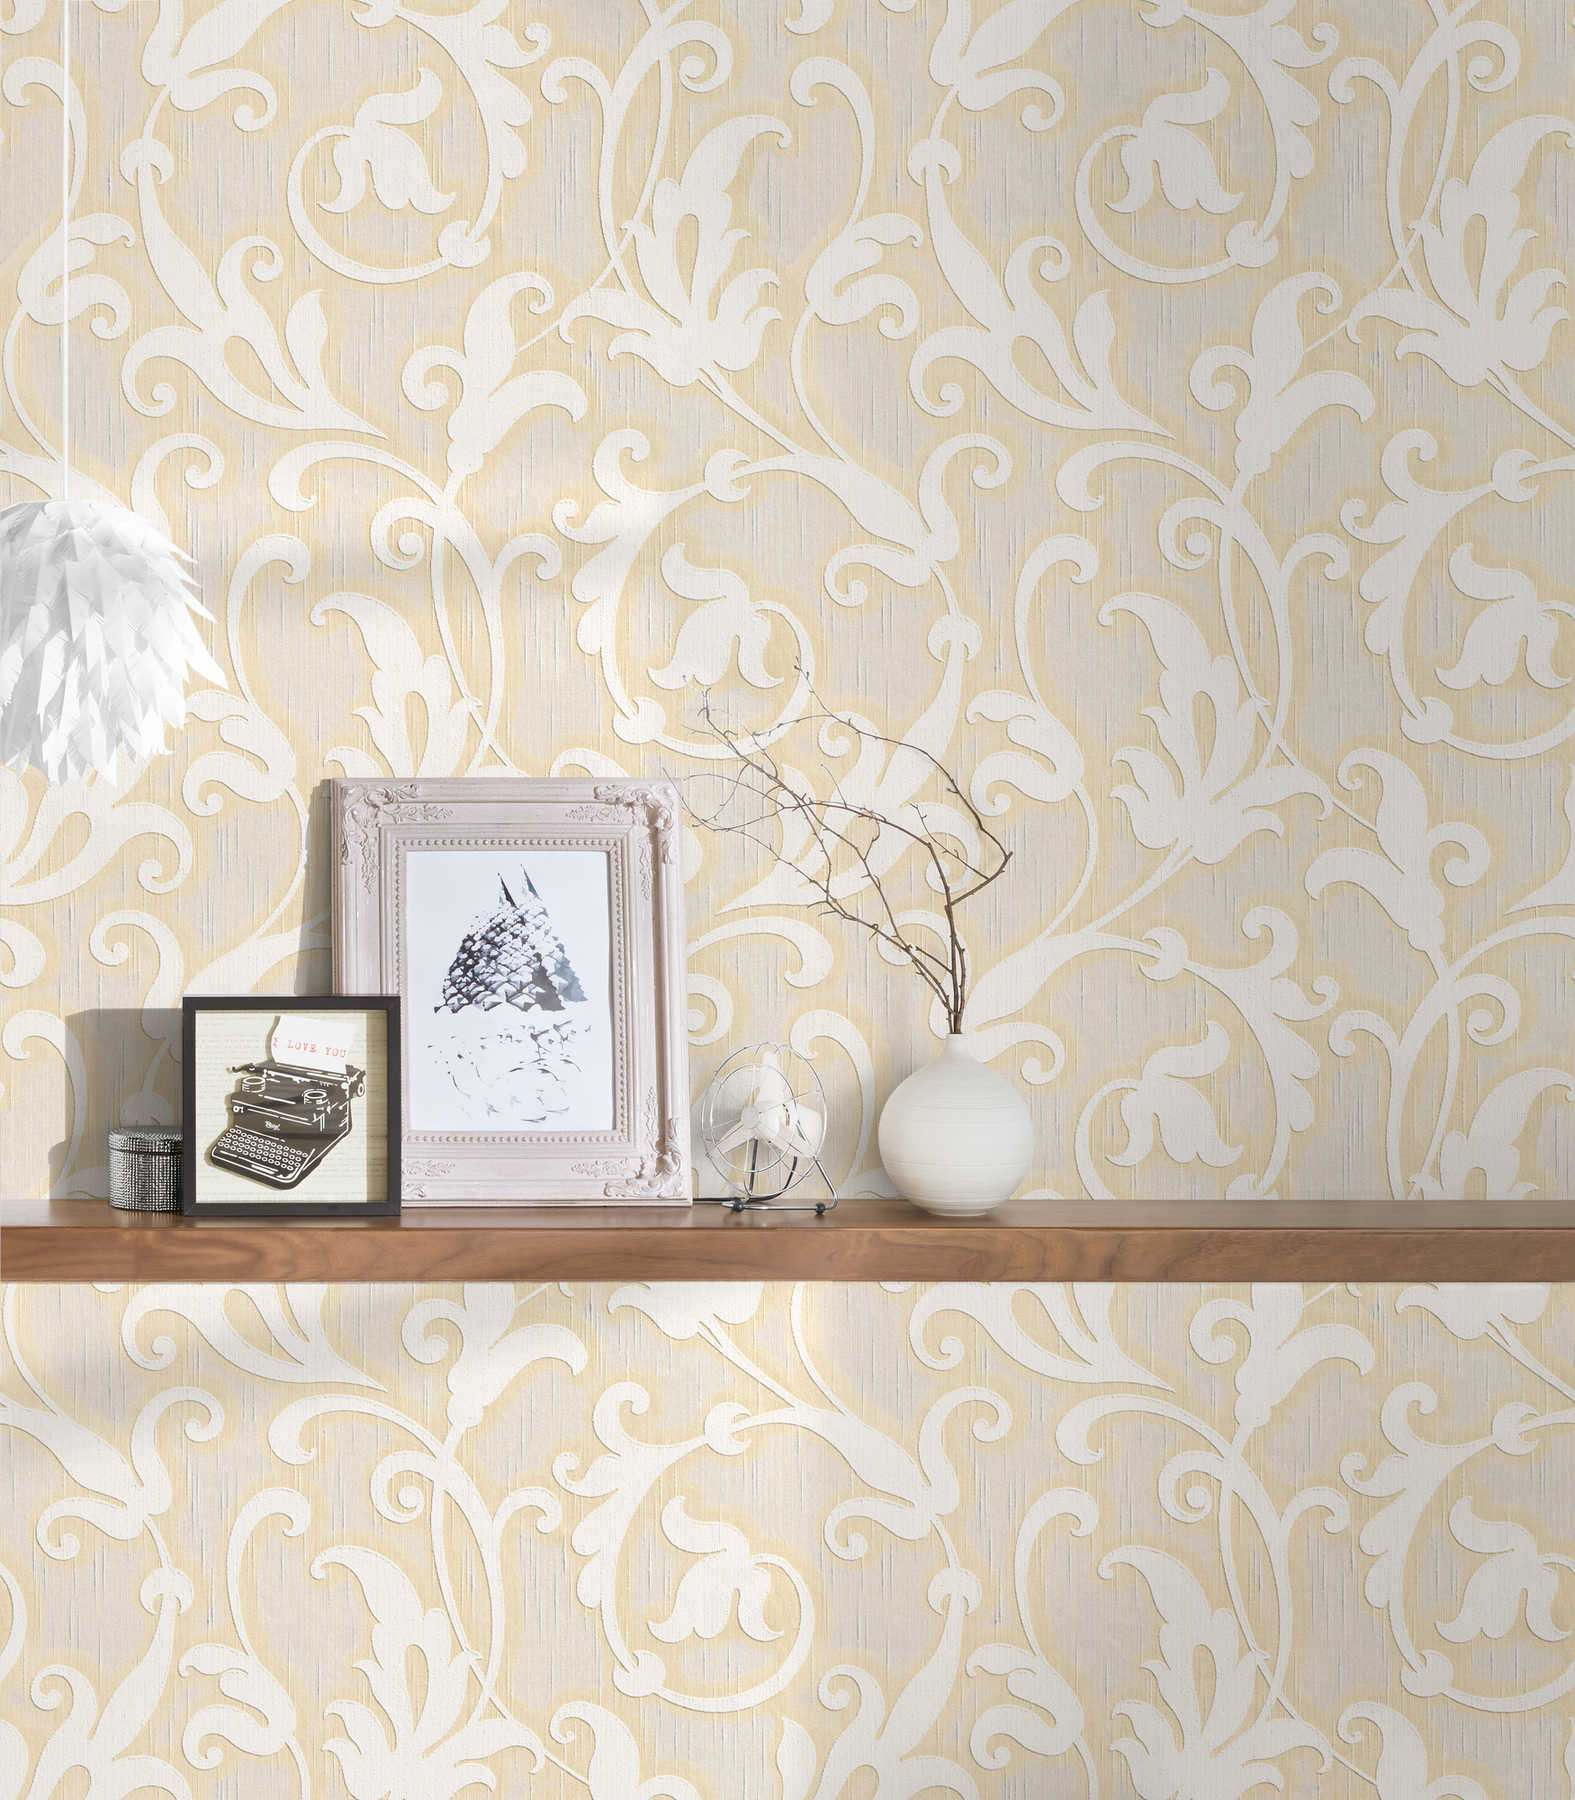             Ornament wallpaper with textured pattern for 3D effect - cream, metallic
        